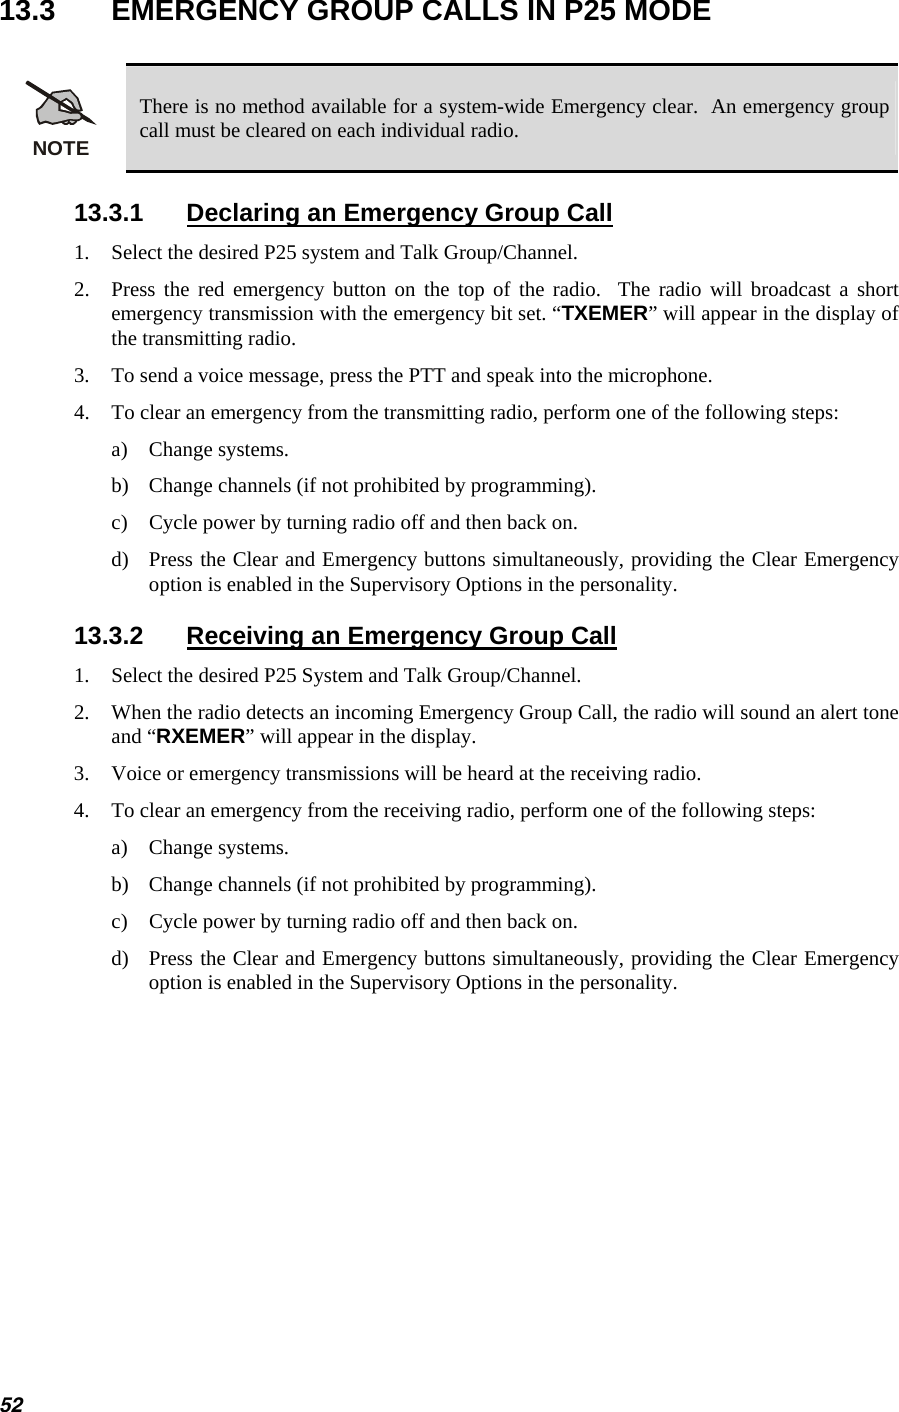  13.3  EMERGENCY GROUP CALLS IN P25 MODE  NOTE There is no method available for a system-wide Emergency clear.  An emergency group call must be cleared on each individual radio. 13.3.1  Declaring an Emergency Group Call 1.  Select the desired P25 system and Talk Group/Channel. 2.  Press the red emergency button on the top of the radio.  The radio will broadcast a short emergency transmission with the emergency bit set. “TXEMER” will appear in the display of the transmitting radio. 3.  To send a voice message, press the PTT and speak into the microphone. 4.  To clear an emergency from the transmitting radio, perform one of the following steps: a) Change systems. b)  Change channels (if not prohibited by programming). c)  Cycle power by turning radio off and then back on. d)  Press the Clear and Emergency buttons simultaneously, providing the Clear Emergency option is enabled in the Supervisory Options in the personality. 13.3.2  Receiving an Emergency Group Call 1.  Select the desired P25 System and Talk Group/Channel. 2.  When the radio detects an incoming Emergency Group Call, the radio will sound an alert tone and “RXEMER” will appear in the display. 3.  Voice or emergency transmissions will be heard at the receiving radio. 4.  To clear an emergency from the receiving radio, perform one of the following steps: a) Change systems. b)  Change channels (if not prohibited by programming). c)  Cycle power by turning radio off and then back on.  d)  Press the Clear and Emergency buttons simultaneously, providing the Clear Emergency option is enabled in the Supervisory Options in the personality. 52 